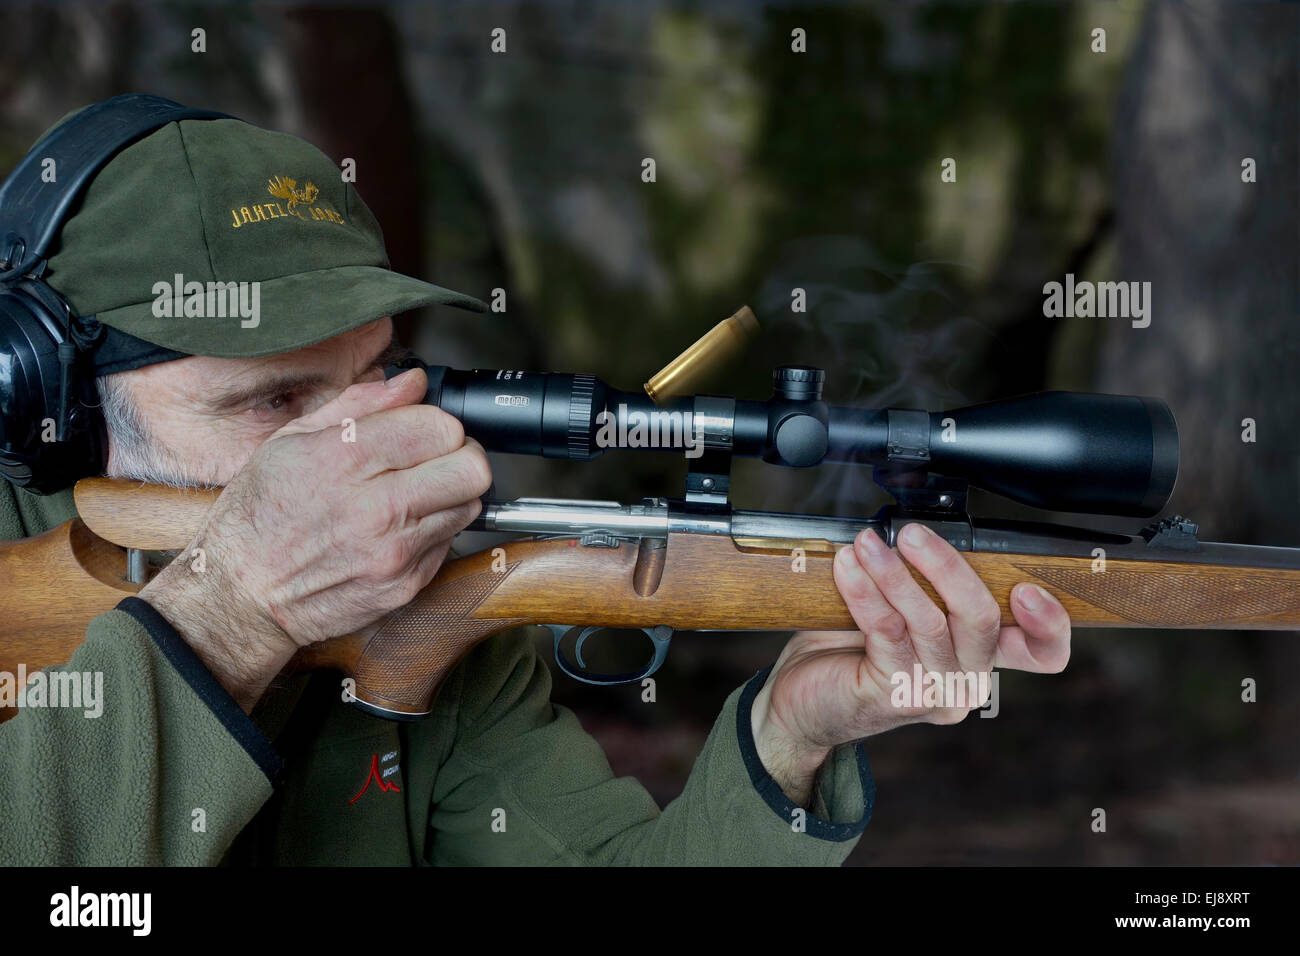 Elderly hunter with mauser bolt action riffle that kicks out empty bullet casing while repeating/reloading the rifle, Stock Photo